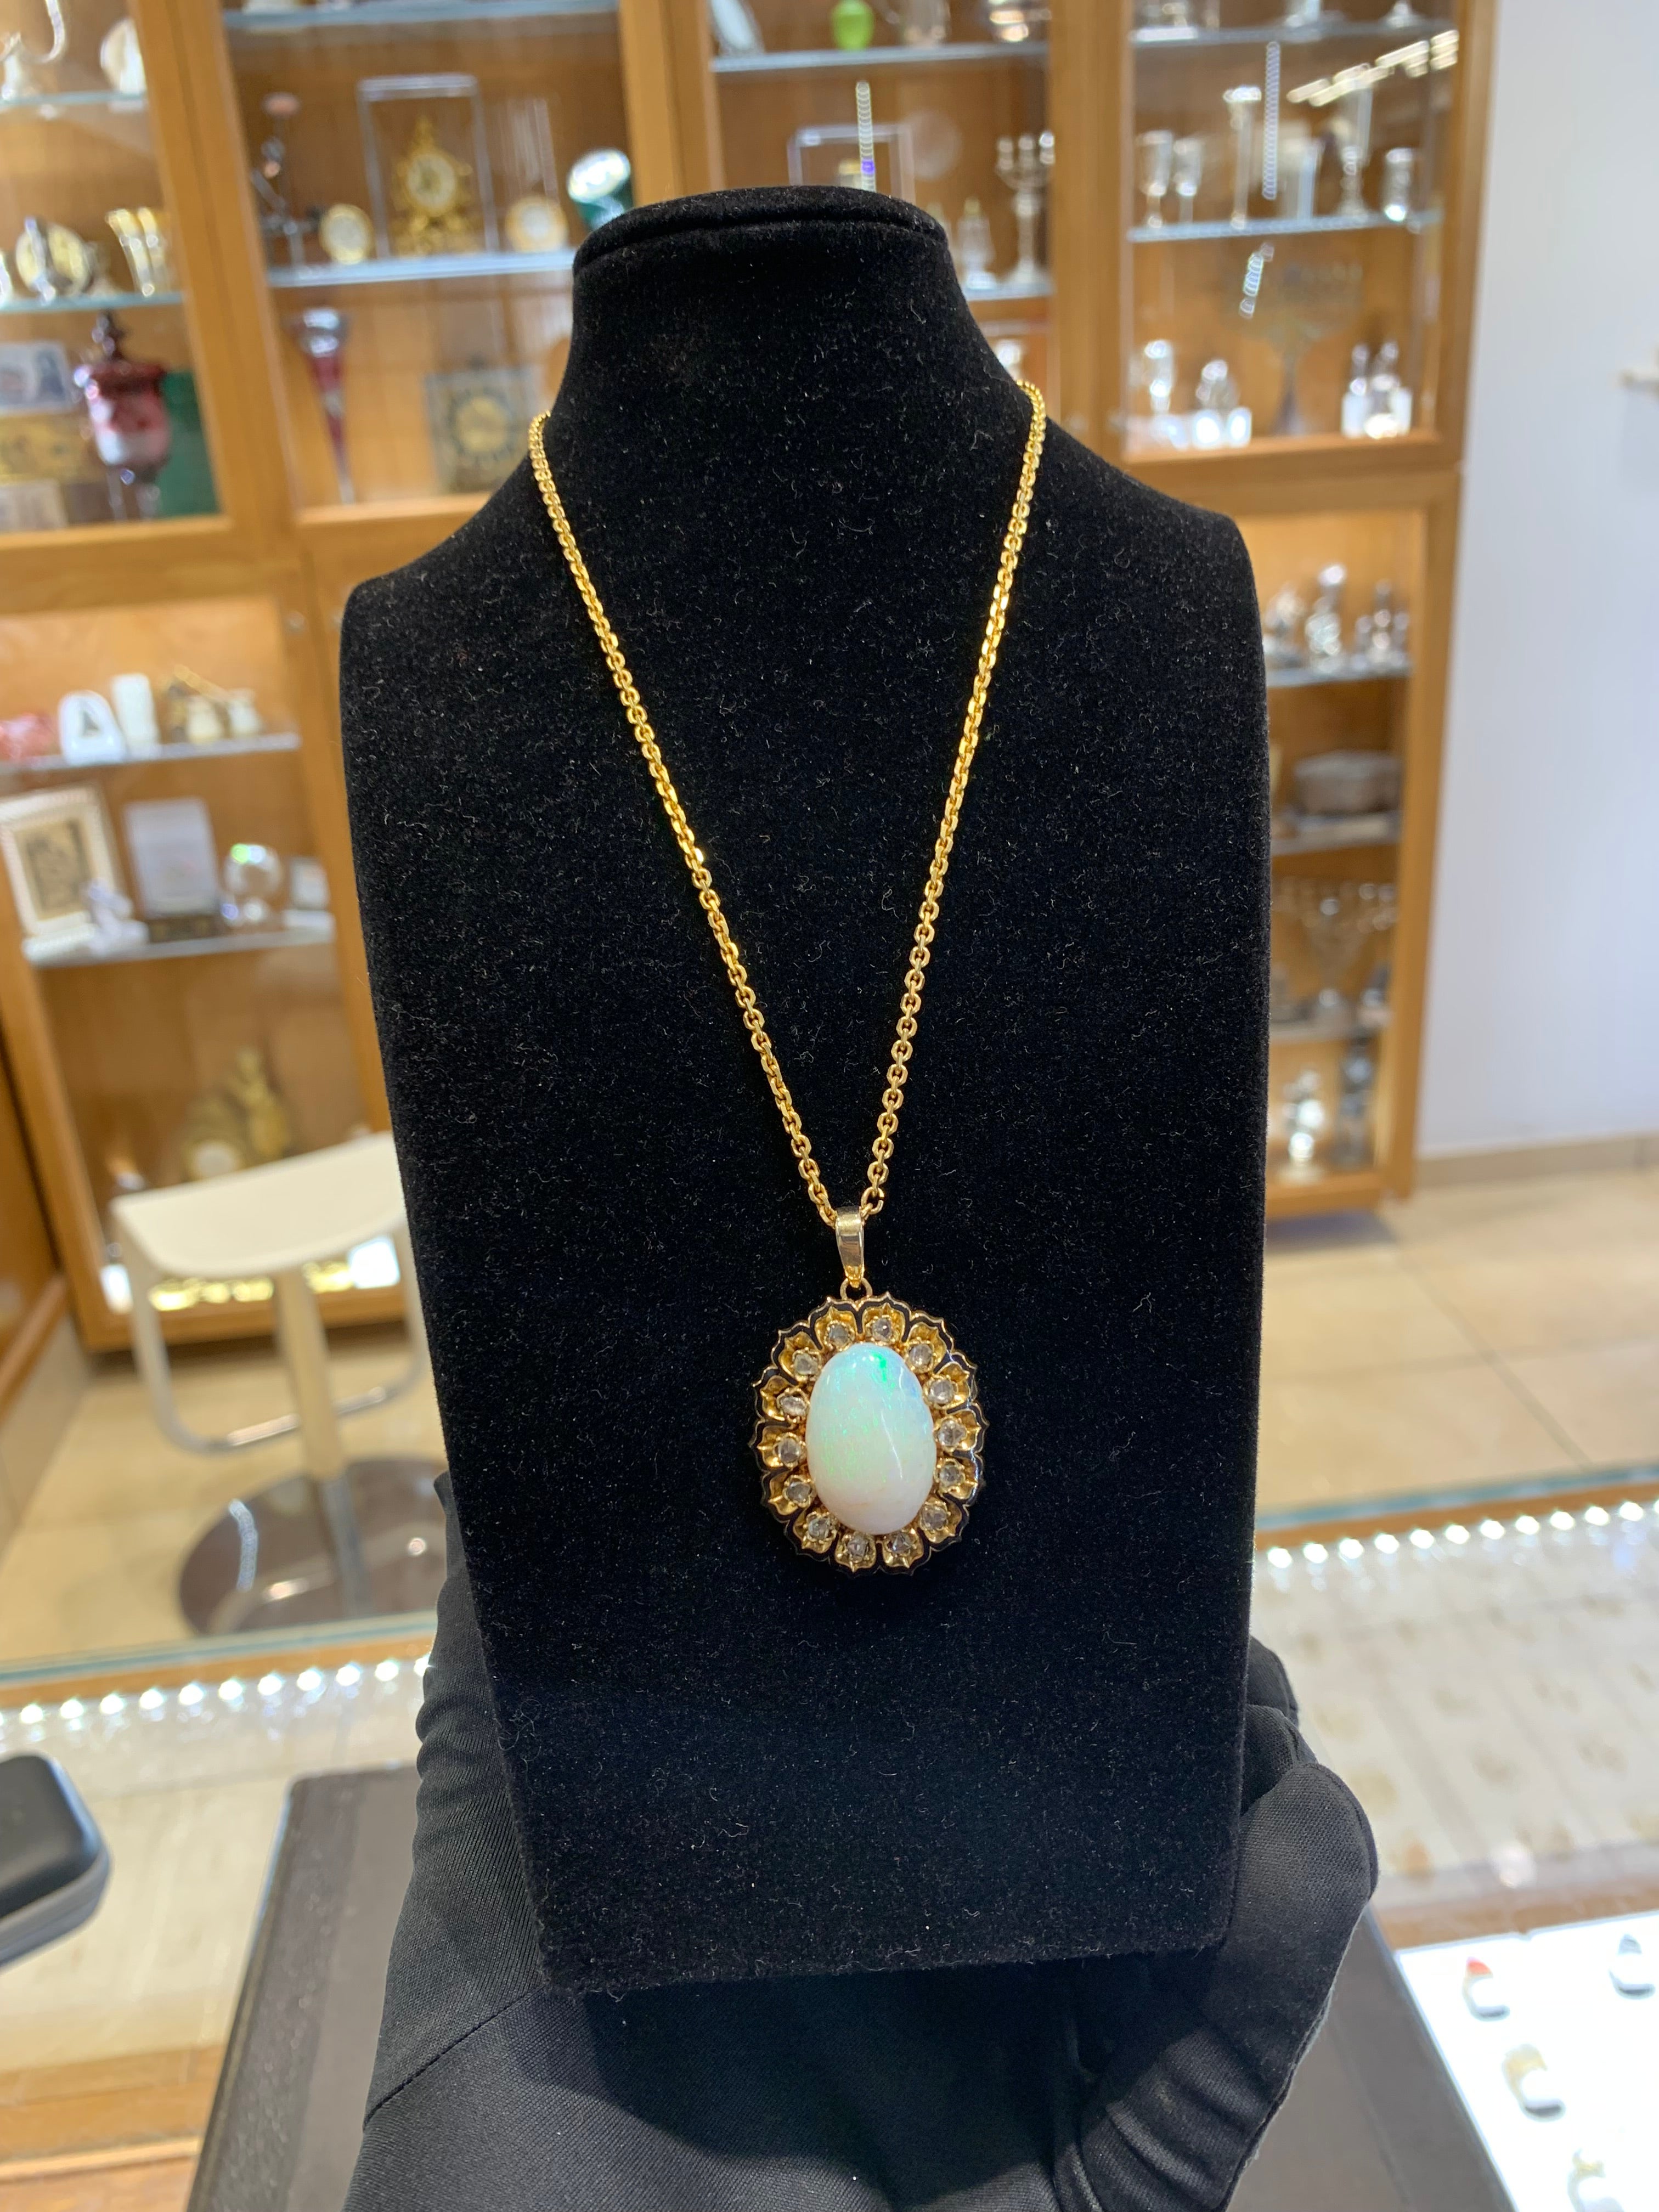 Beautifully Hand Crafted & Engraved 18k Solid Yellow Gold Opal & Diamond Pendant.
Old Cut Diamonds Set Into The Pendant. 
Incredible Craftsmanship, Very Well Made.
Amazingly Outlined With Black Enamel. 
Nice & Heavy Piece. Large Size